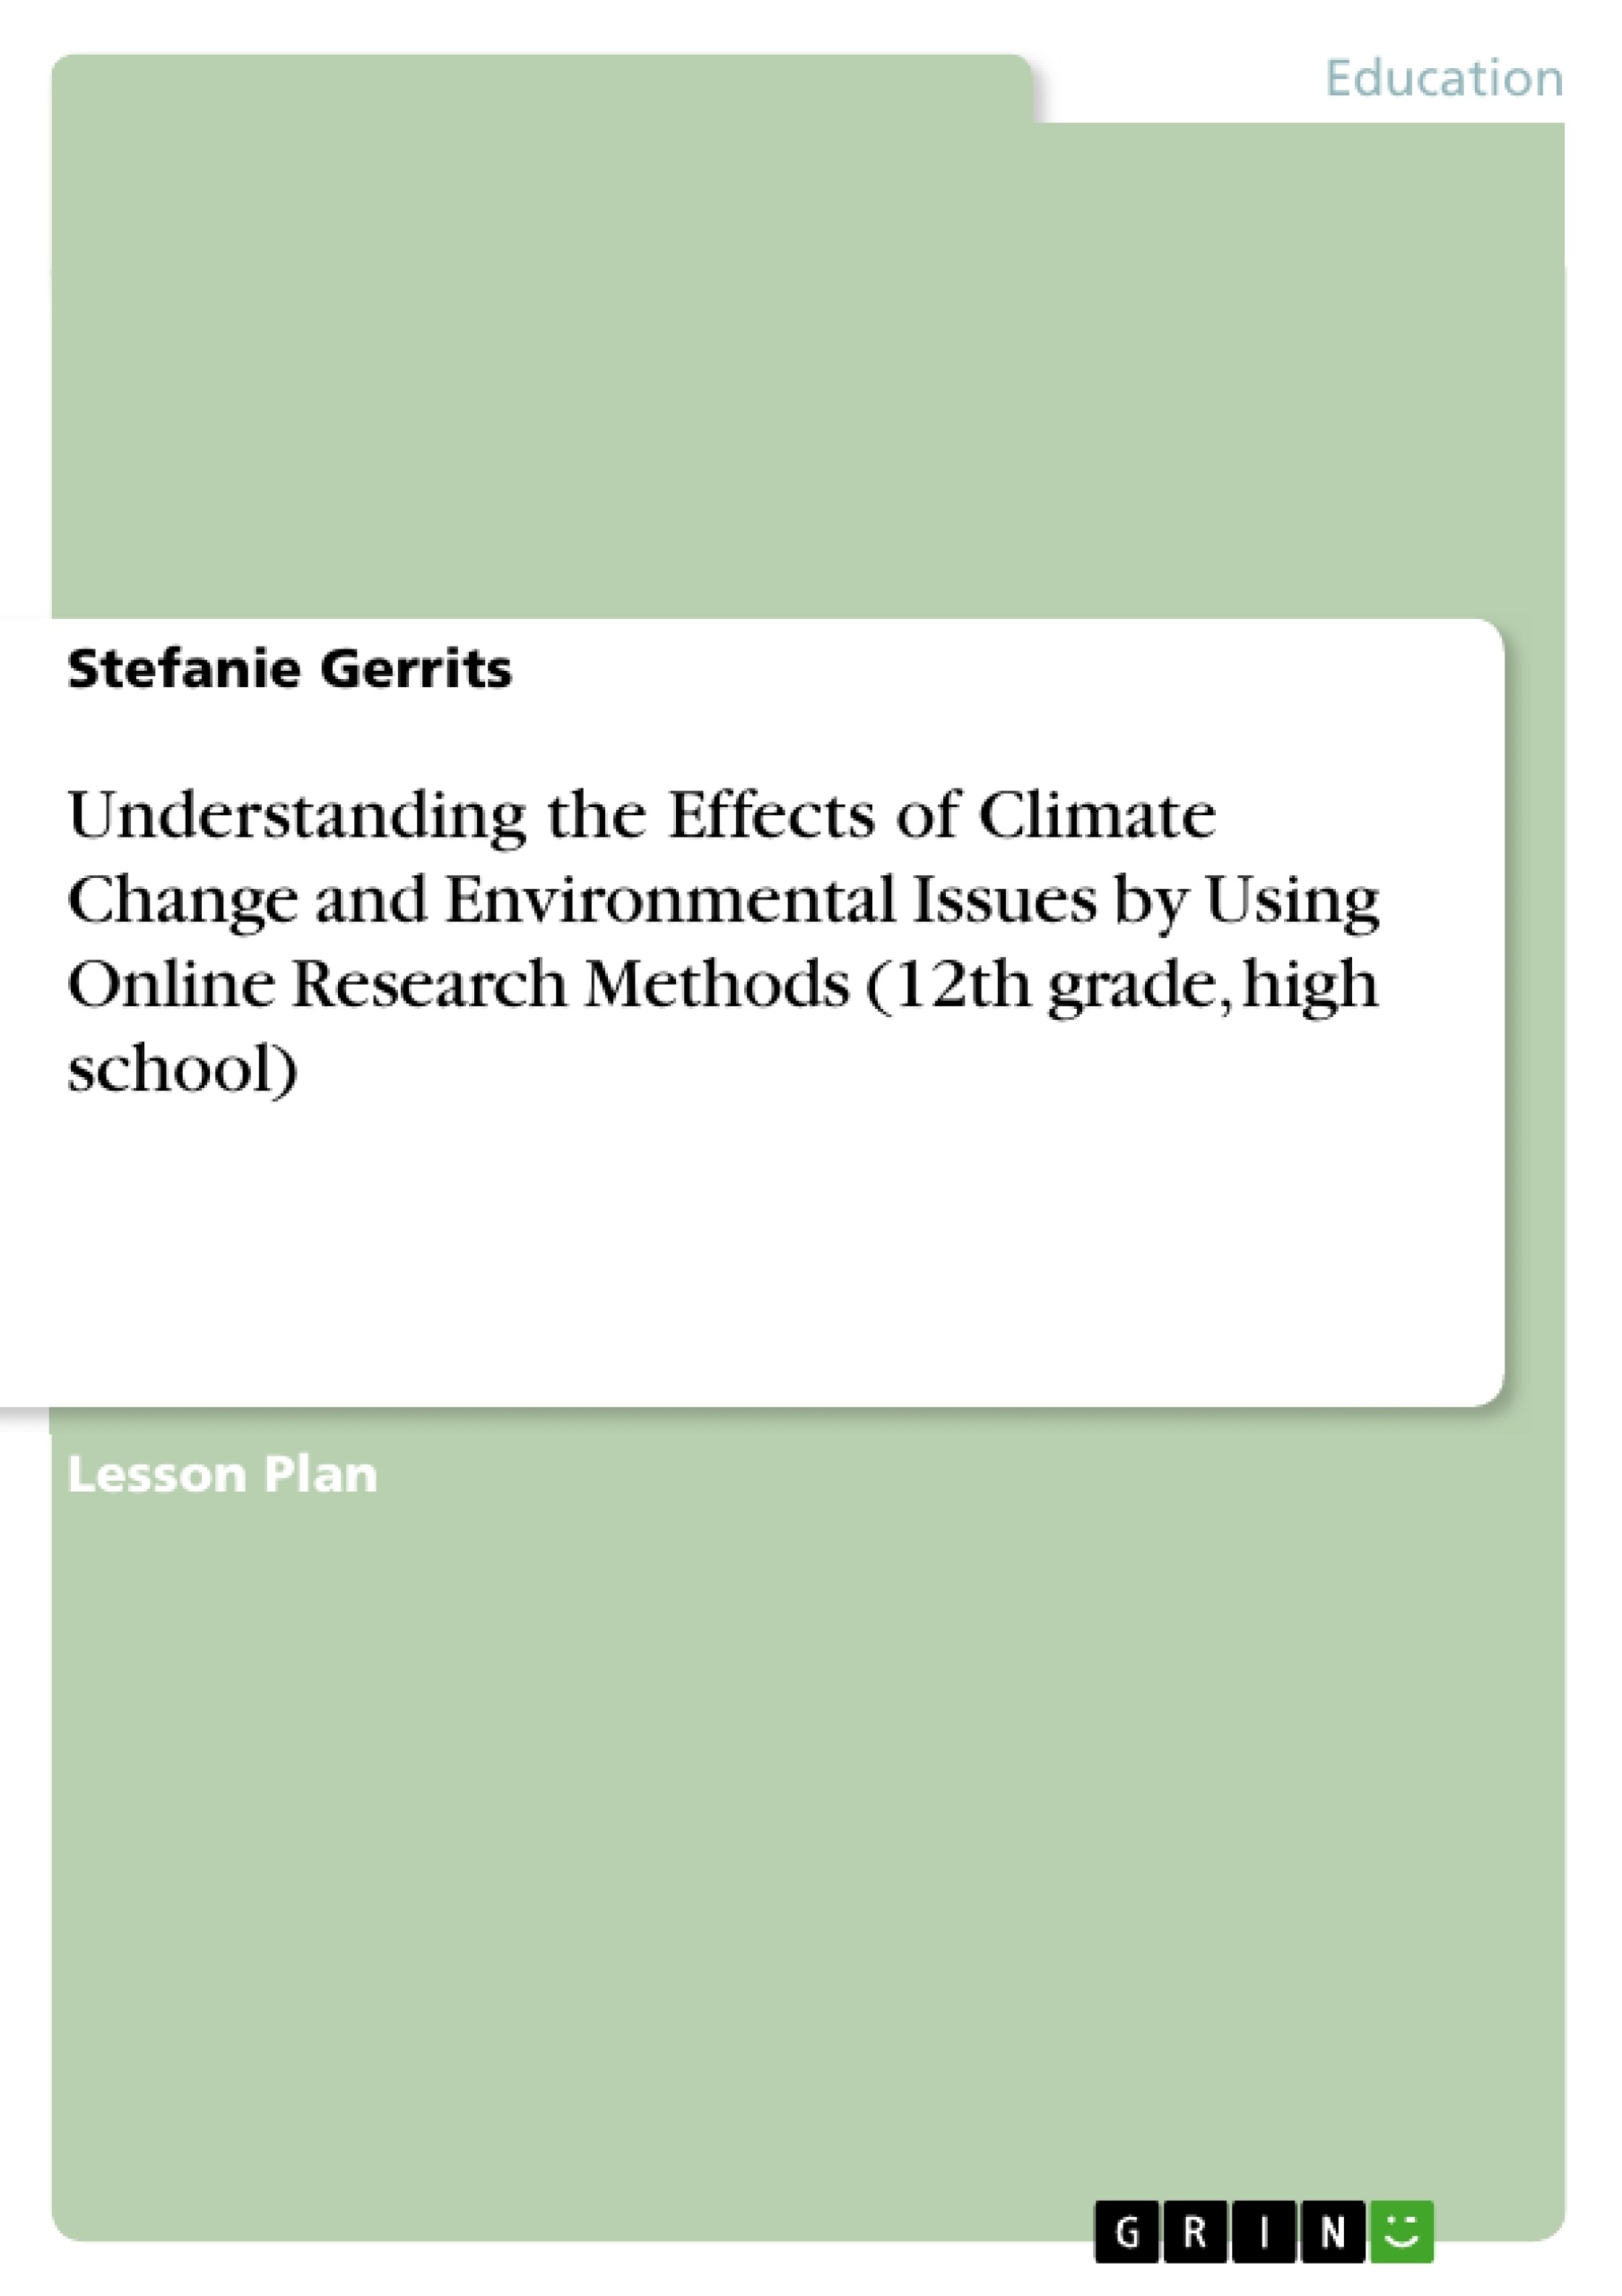 Title: Understanding the Effects of Climate Change and Environmental Issues by Using Online Research Methods (12th grade, high school)